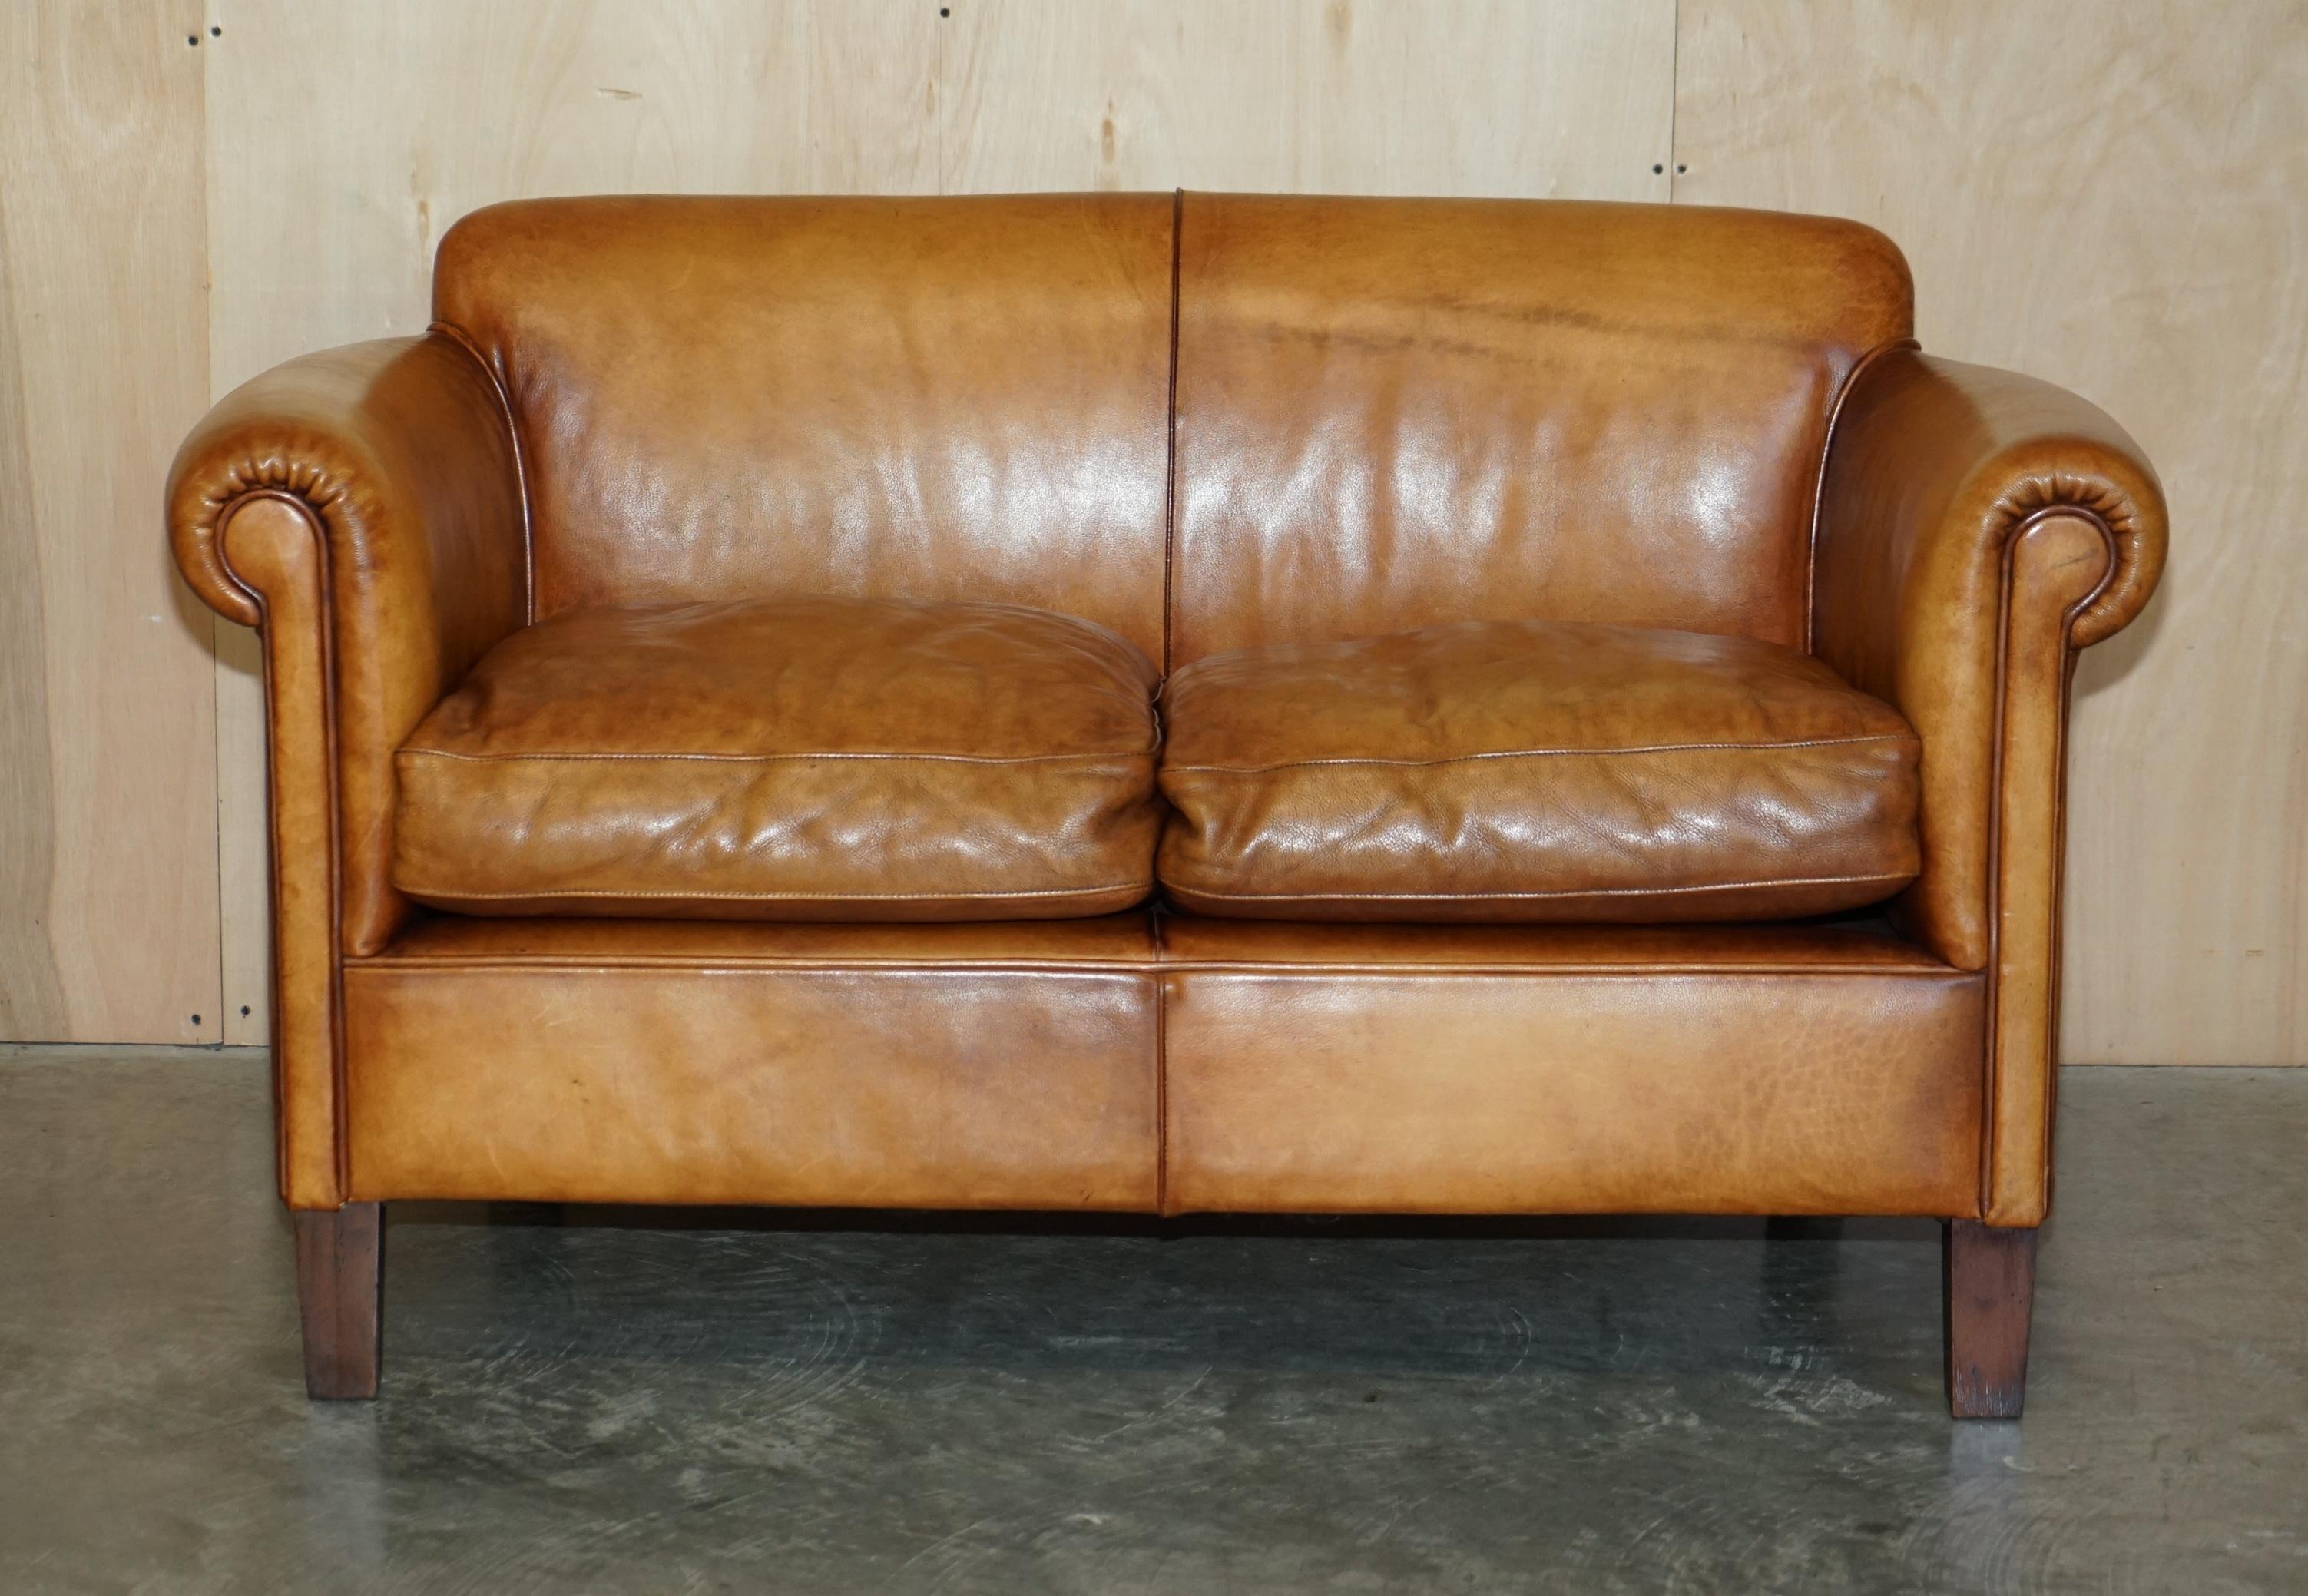 Rare John Lewis Camford Heritage Brown Leather Armchair & Two Seat Sofa Suite For Sale 2